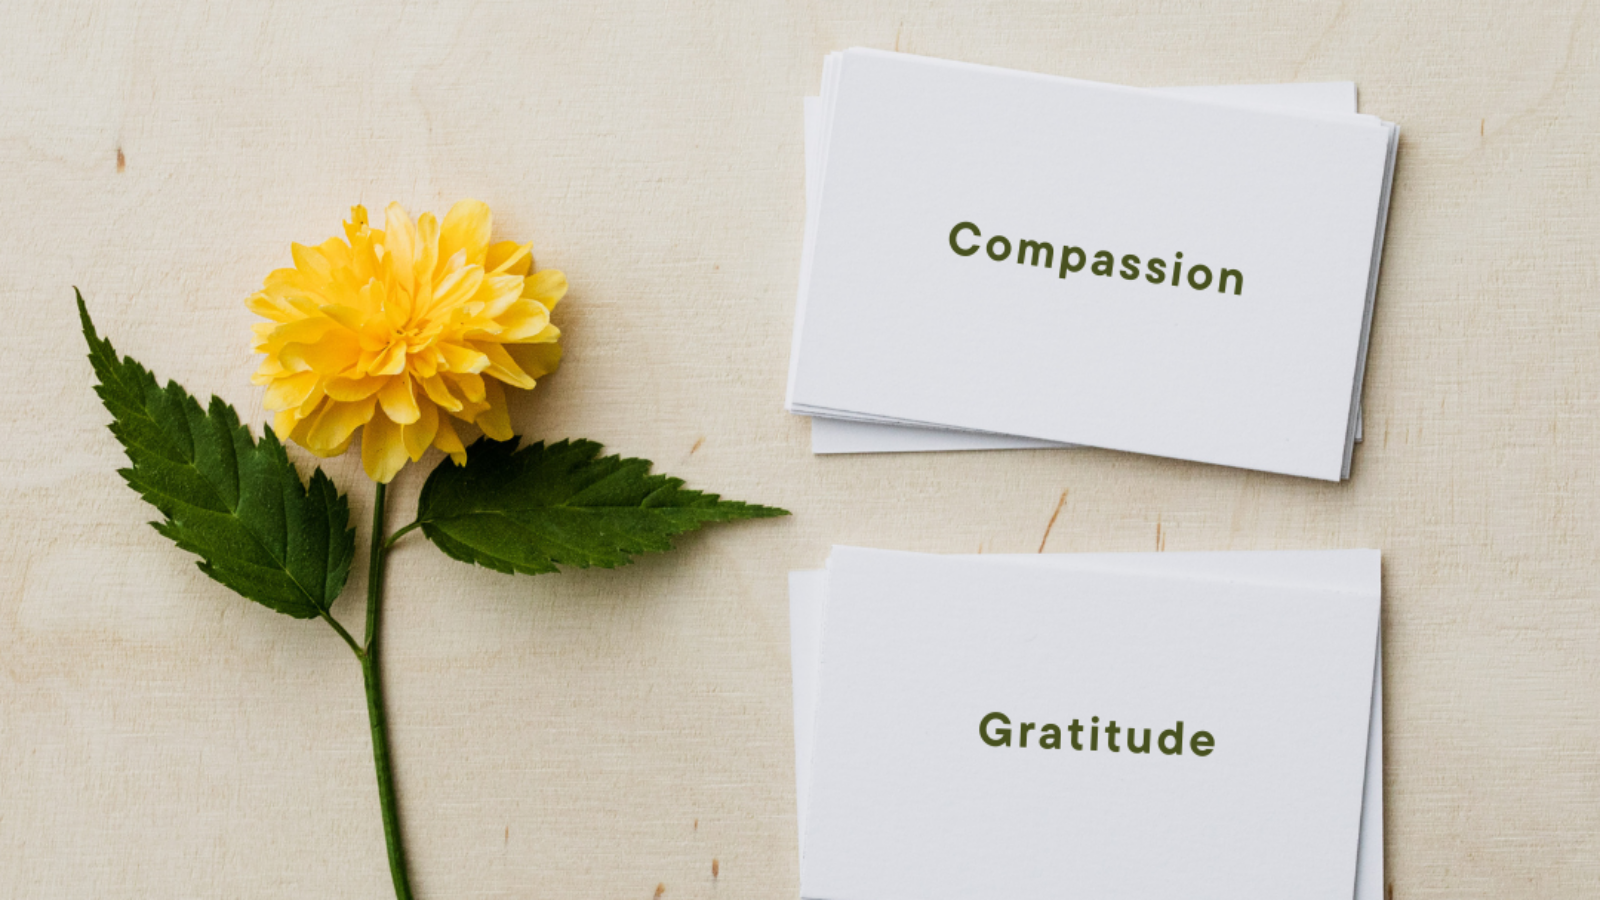 Value Cards for Gratitude and Compassion